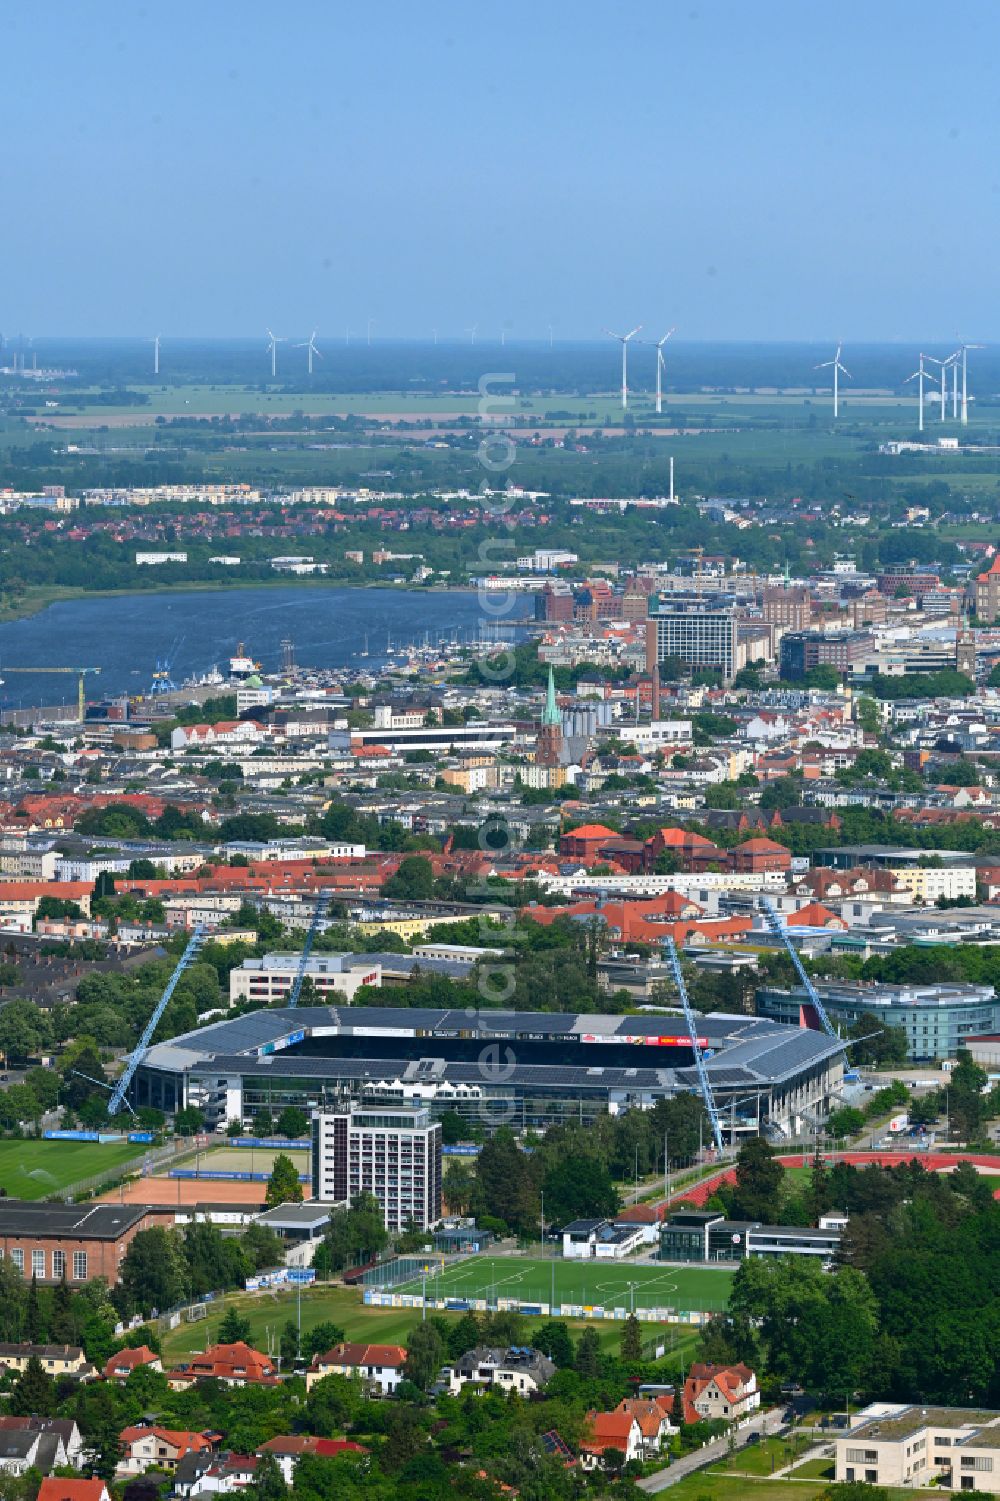 Rostock from the bird's eye view: Sports facility area of the arena of the Ostseestadion stadium (formerly DKB Arena) on Kopernikusstrasse in the Hansaviertel district of Rostock in the federal state of Mecklenburg-Vorpommern, Germany